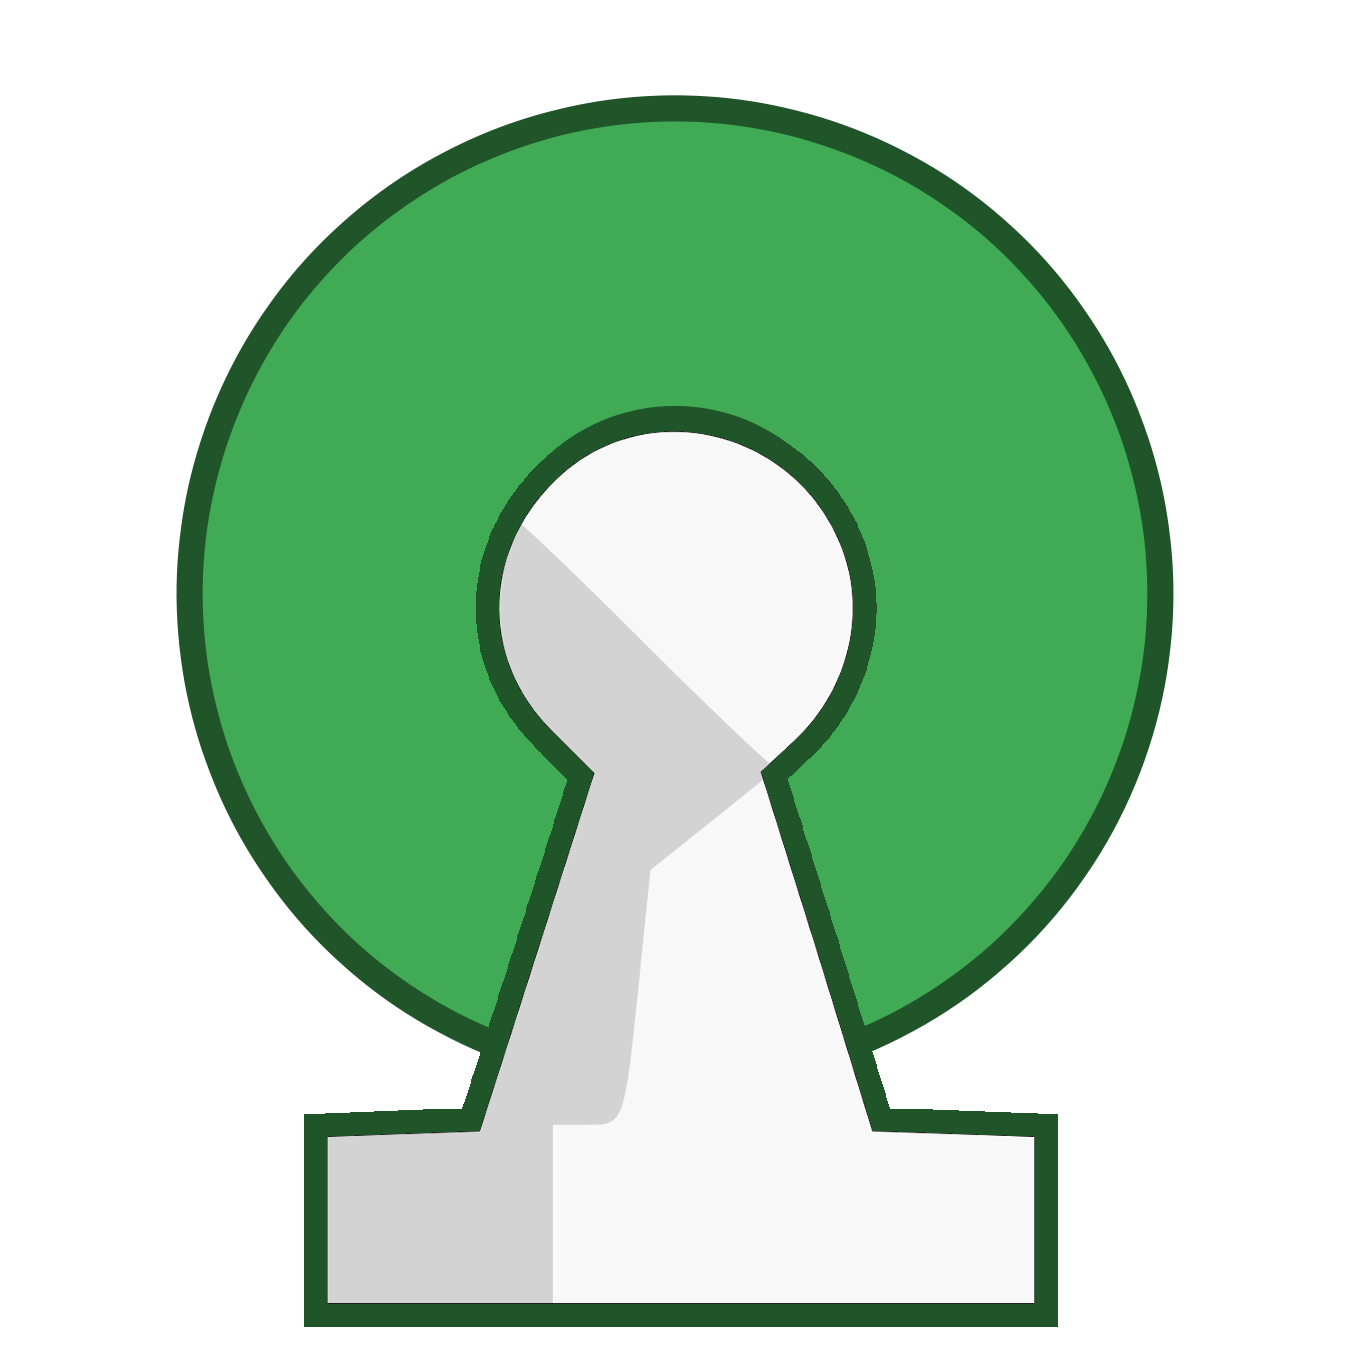 The new logo for open source, which I propose for android app from lichess  (Free Online Chess) — Steemit